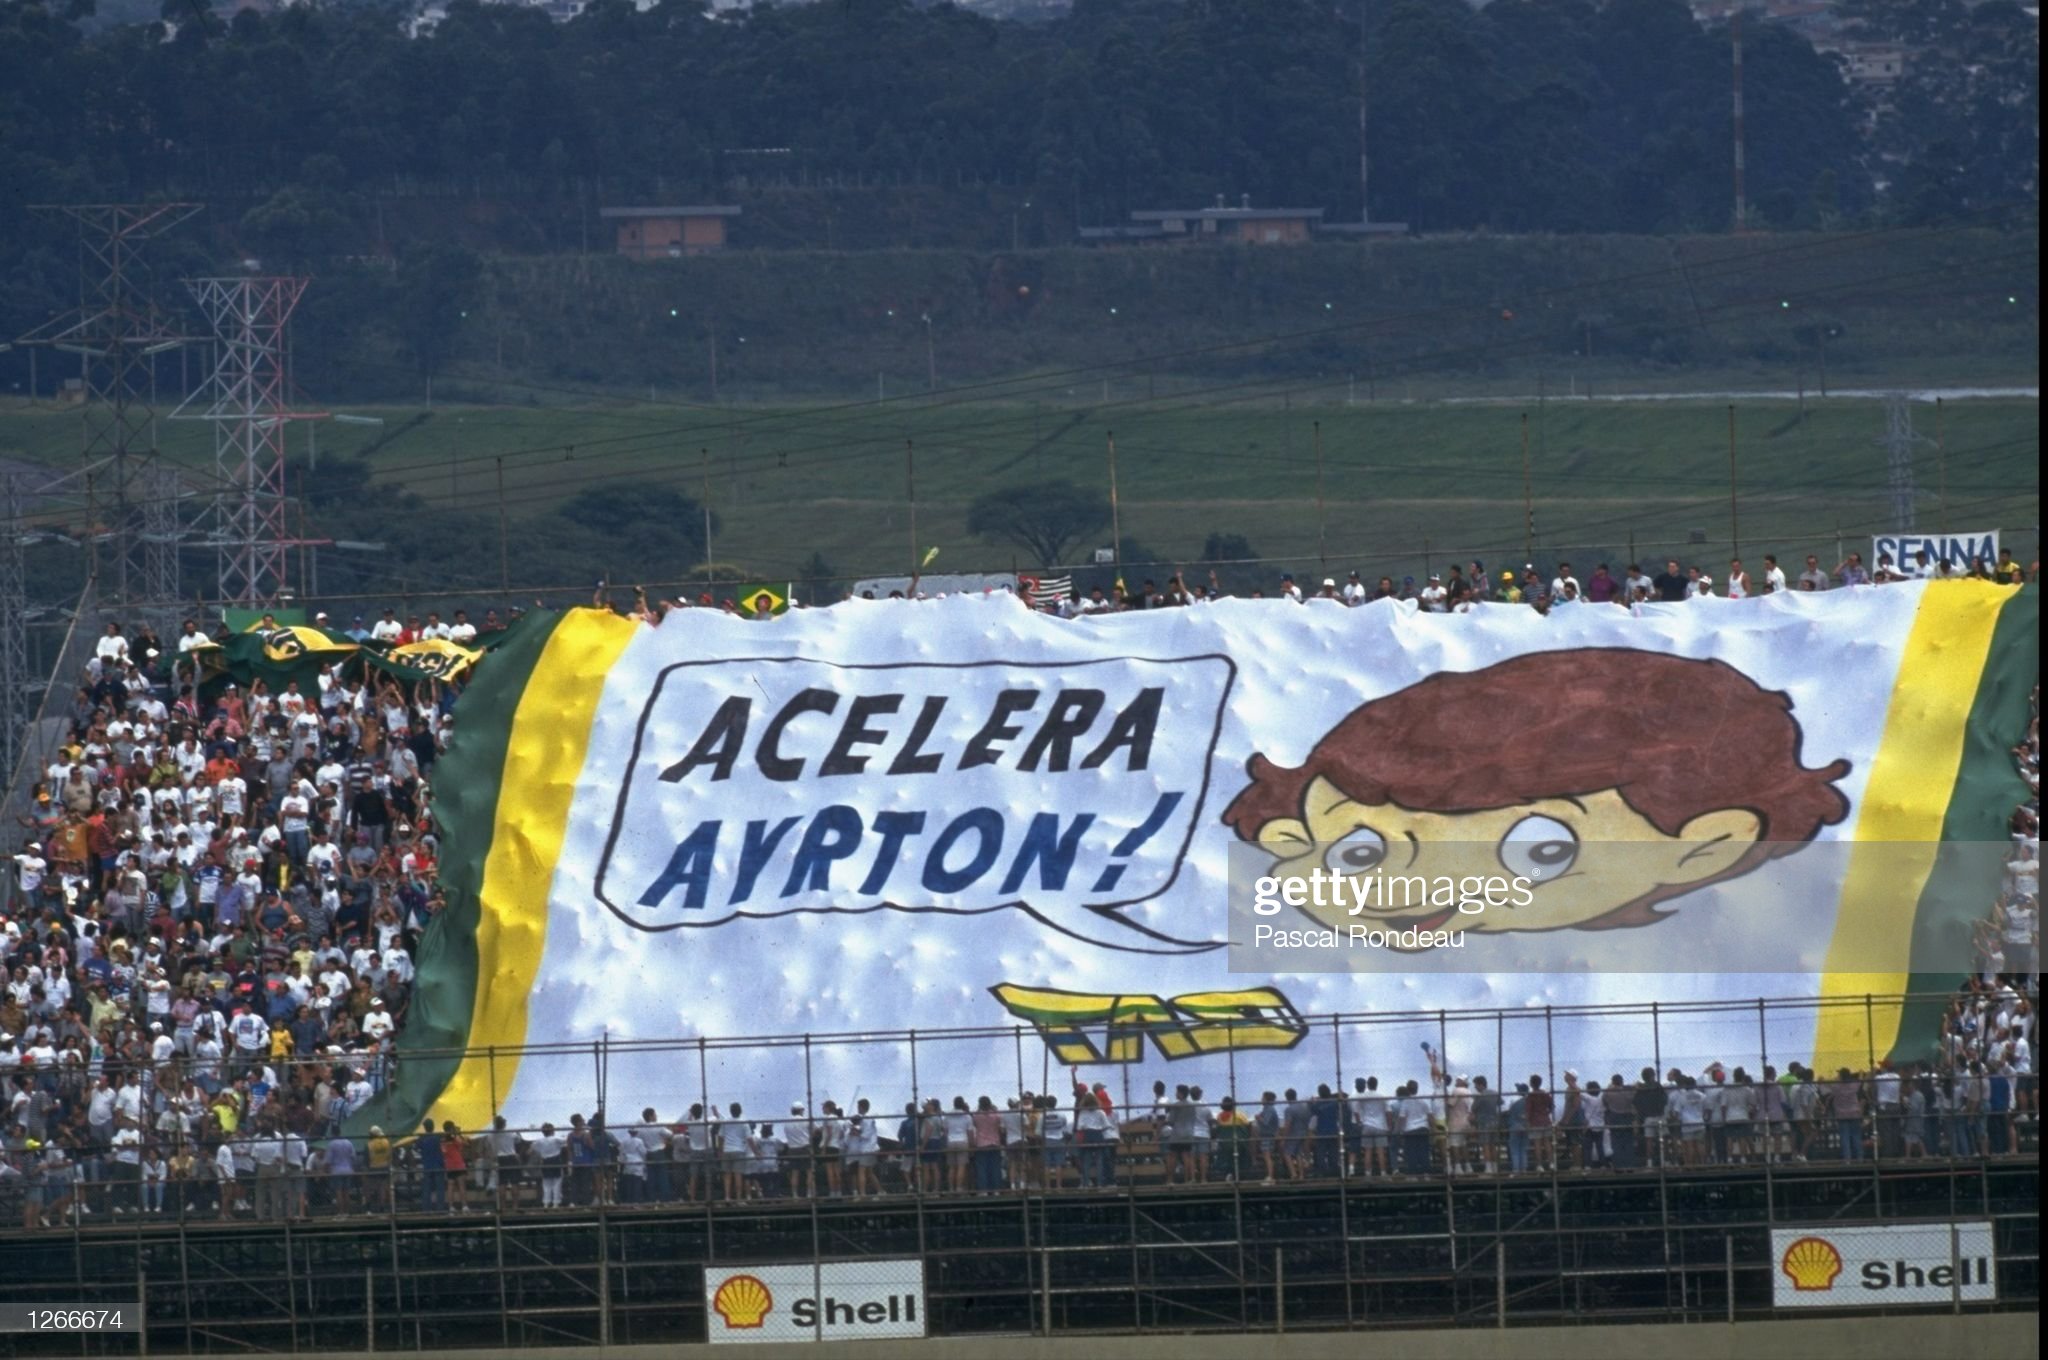 Fans hold a huge flag in support of Williams Renault driver Ayrton Senna during the Brazilian Grand Prix at the Interlagos circuit on March 27, 1994.